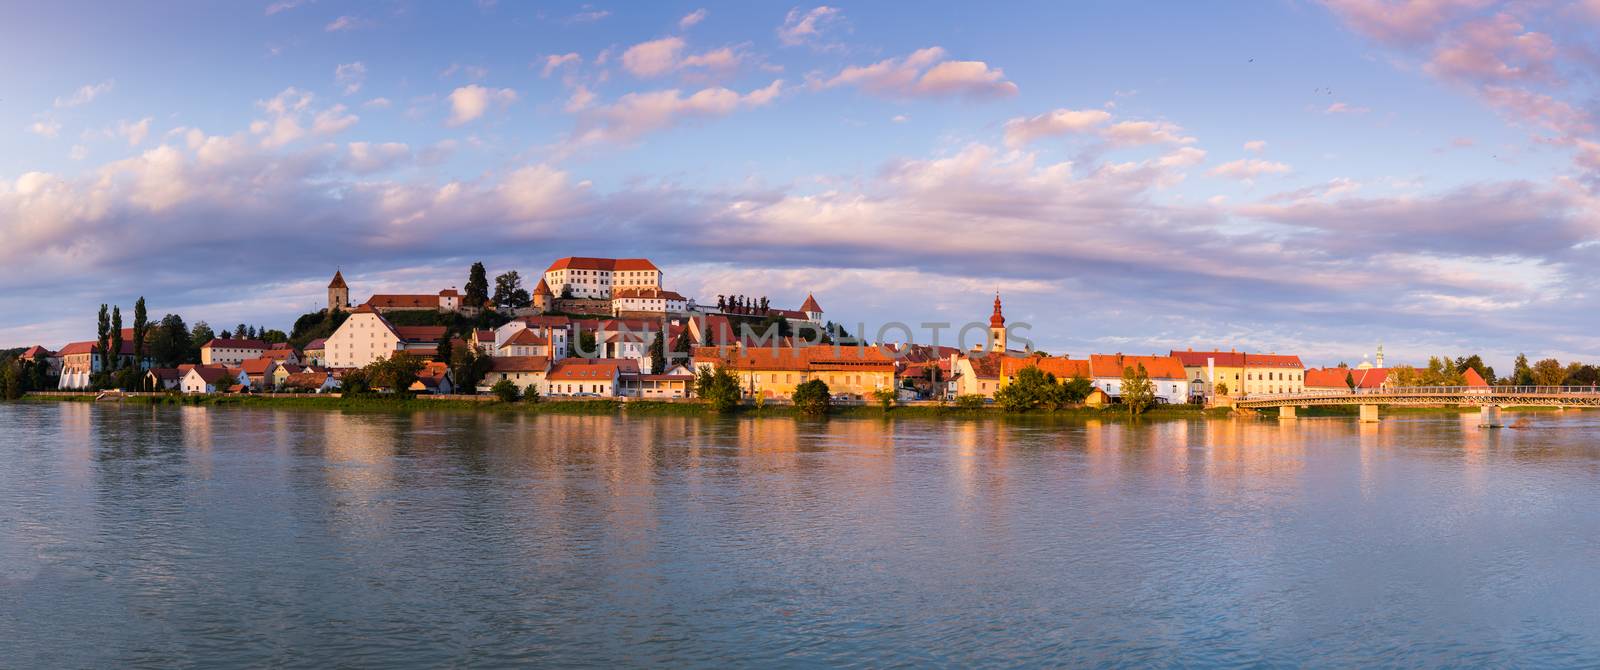 Ptuj, Slovenia, panoramic shot of oldest city in Slovenia with a castle overlooking the old town by asafaric